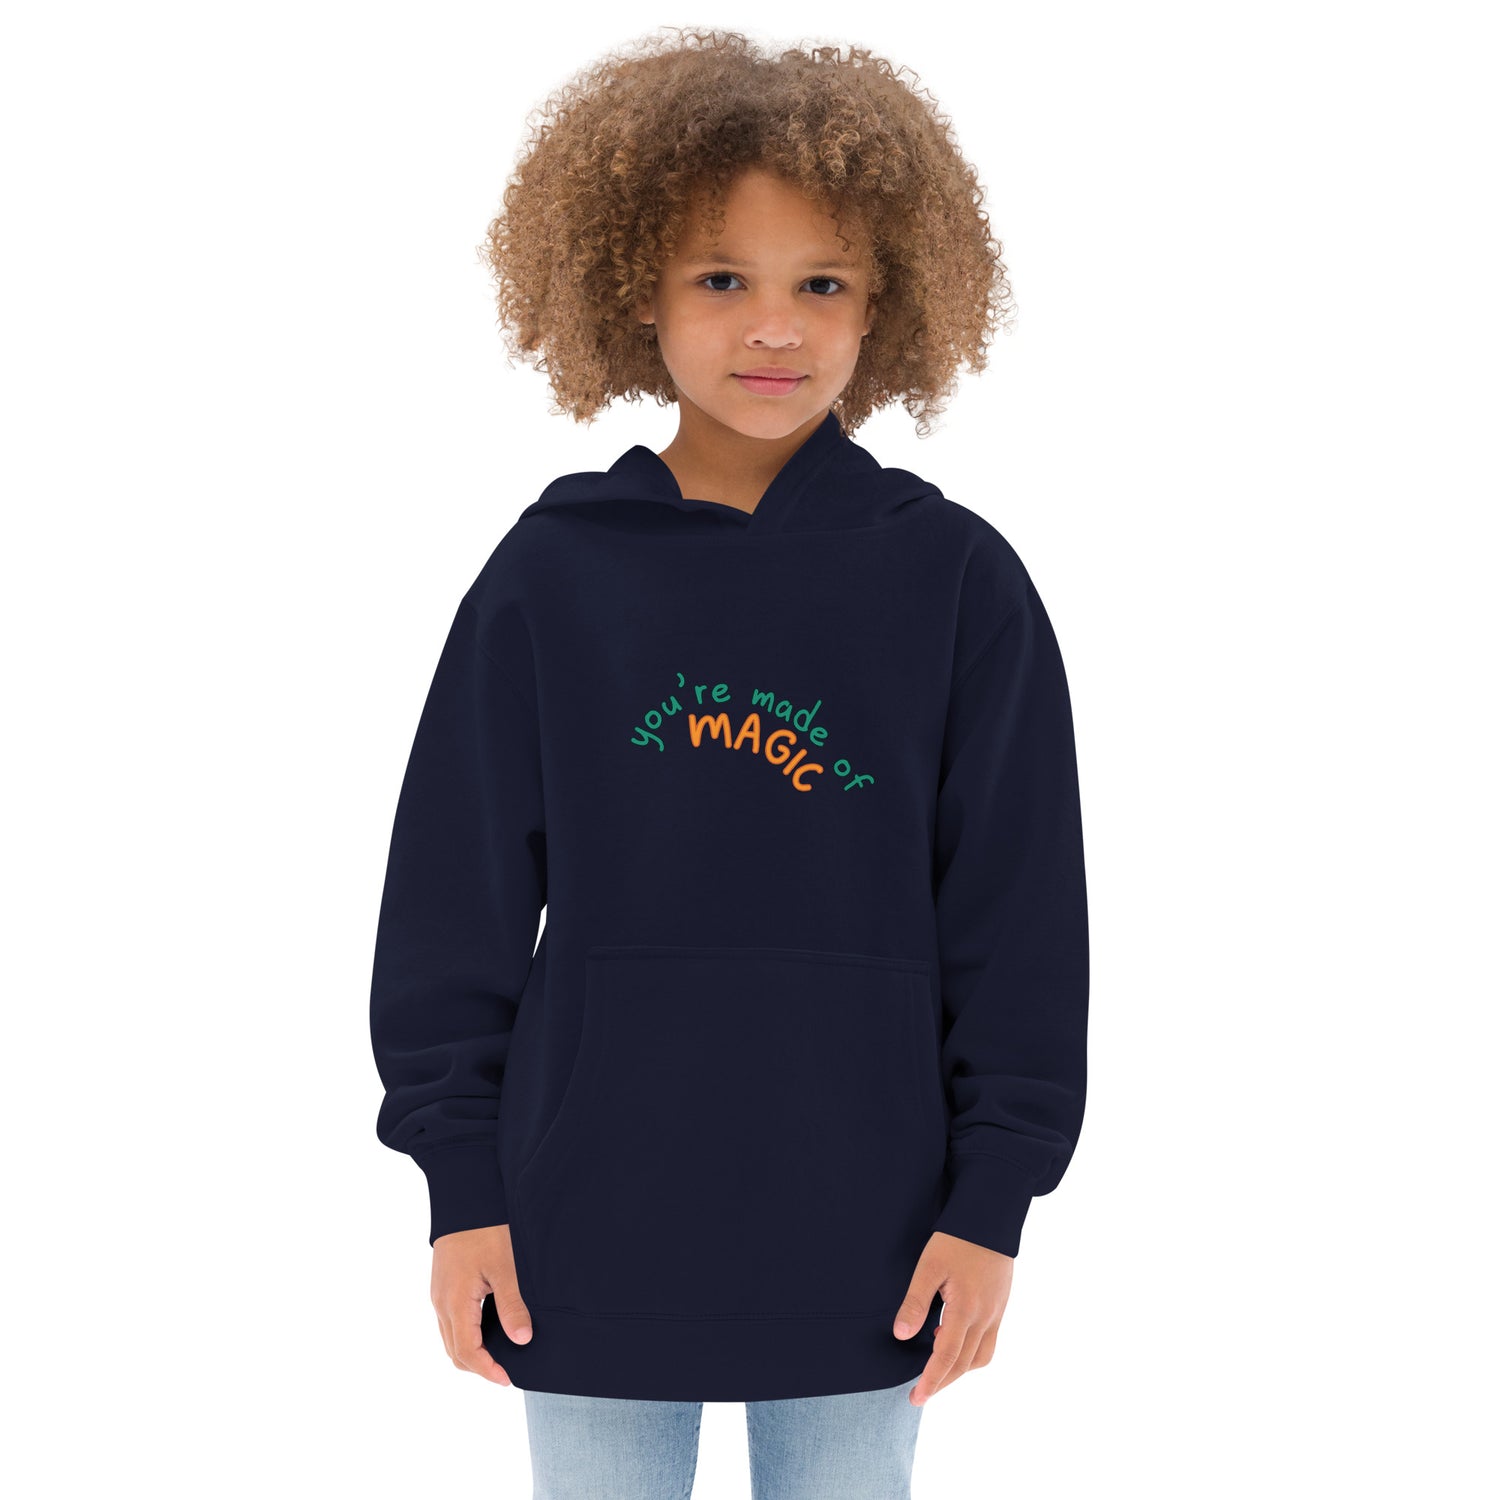 Indigo Kidswear hoodie featuring a " you're made of Magic" design with pockets at front.